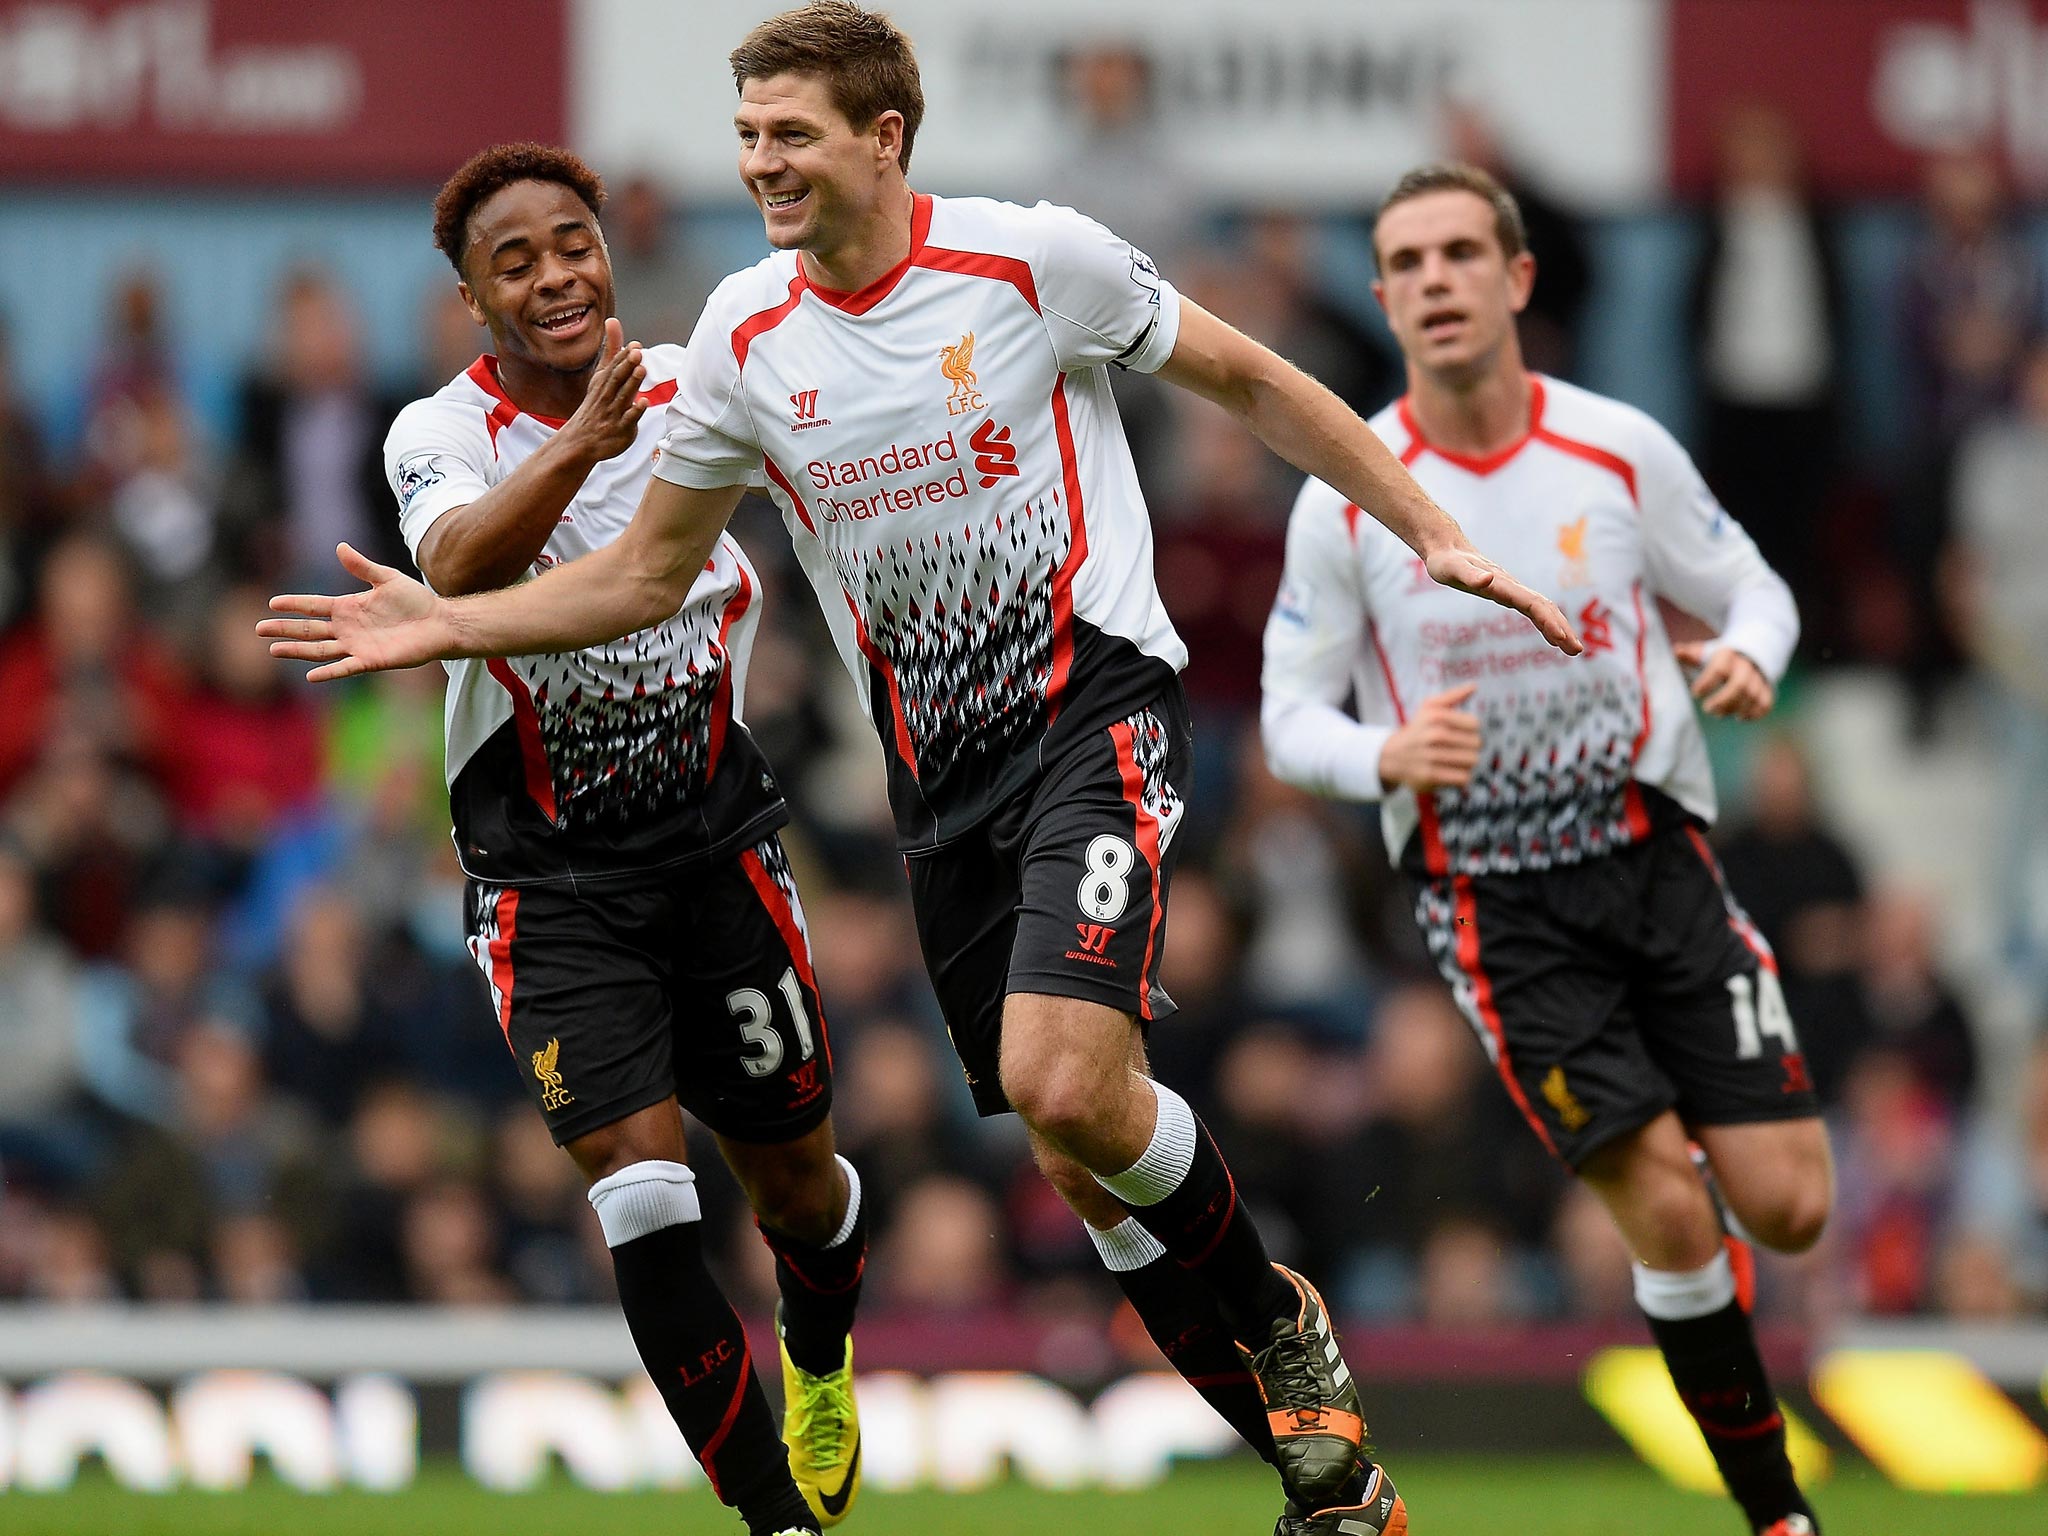 Steven Gerrard celebrates scoring for Liverpool in the victory over West Ham